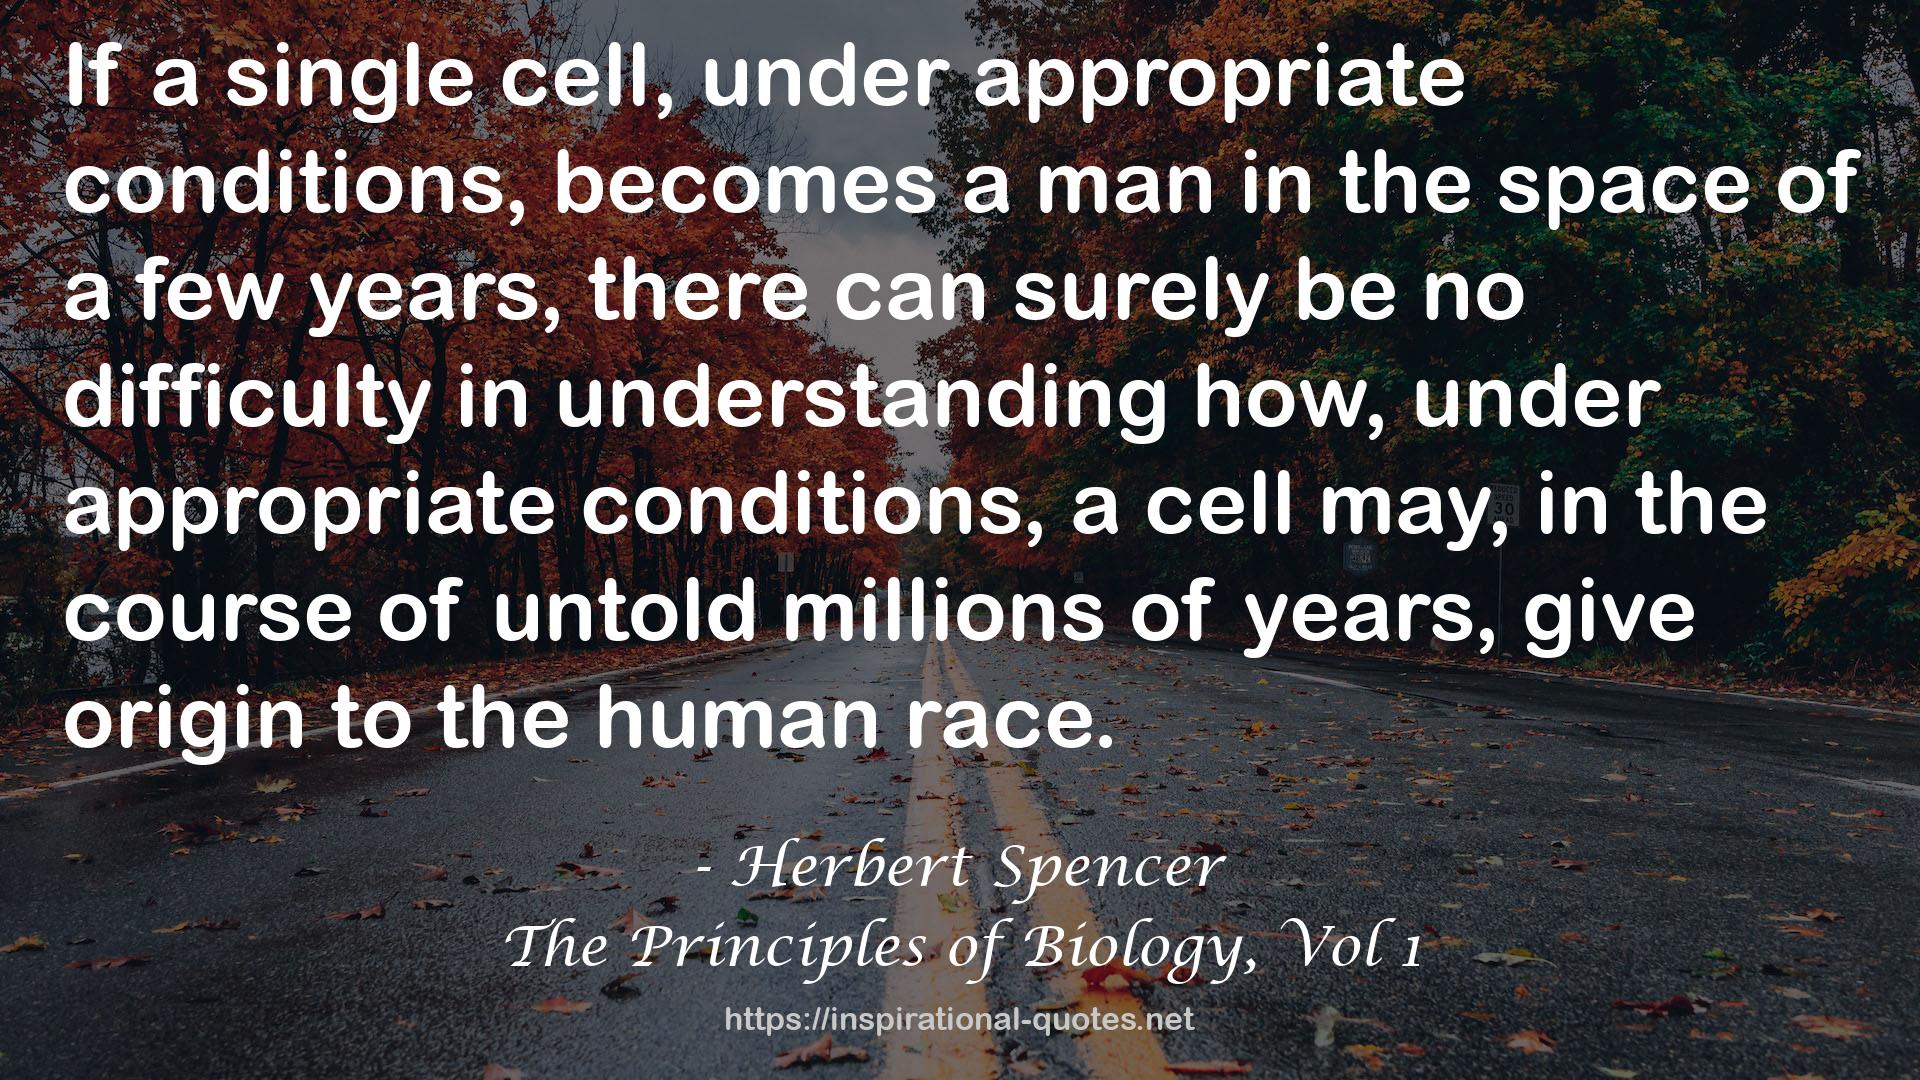 The Principles of Biology, Vol 1 QUOTES